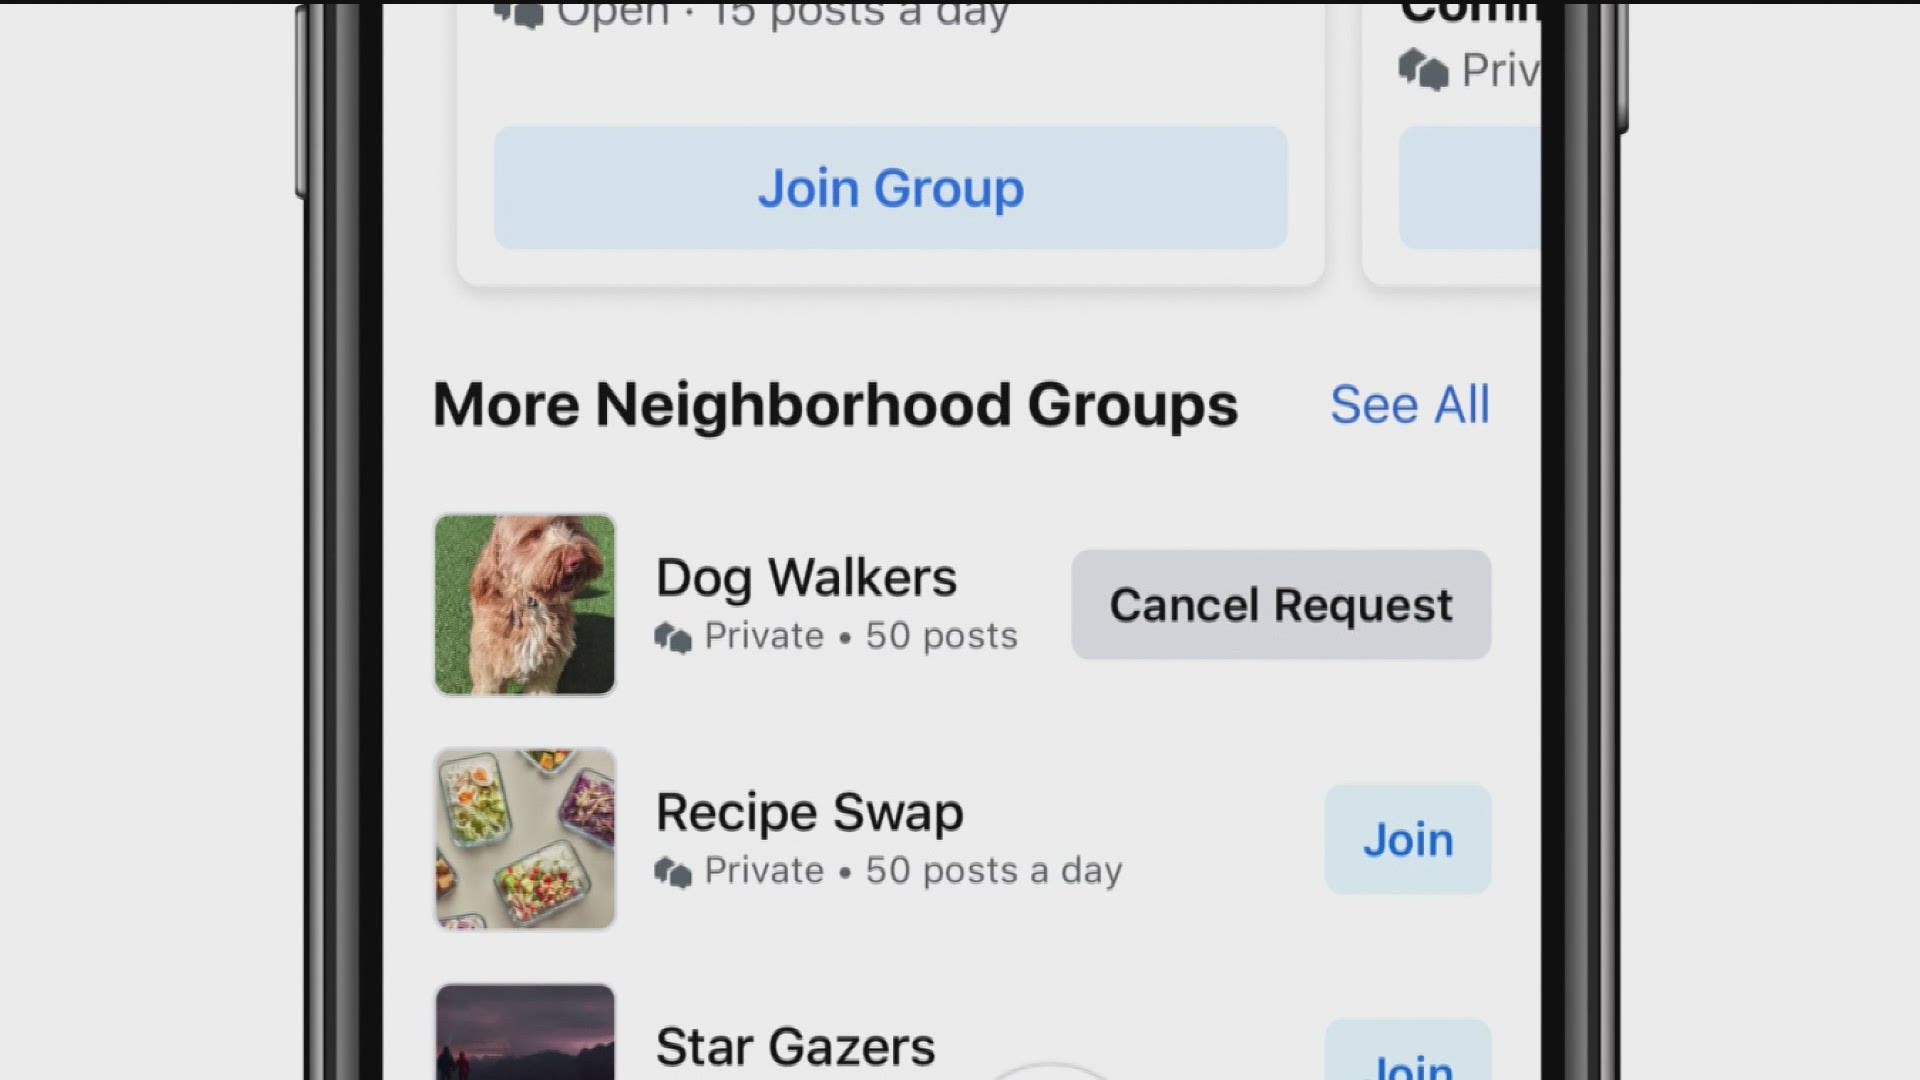 During the pandemic many users turned to online community pages and resources, now Facebook wants a centralized Neighborhood app.